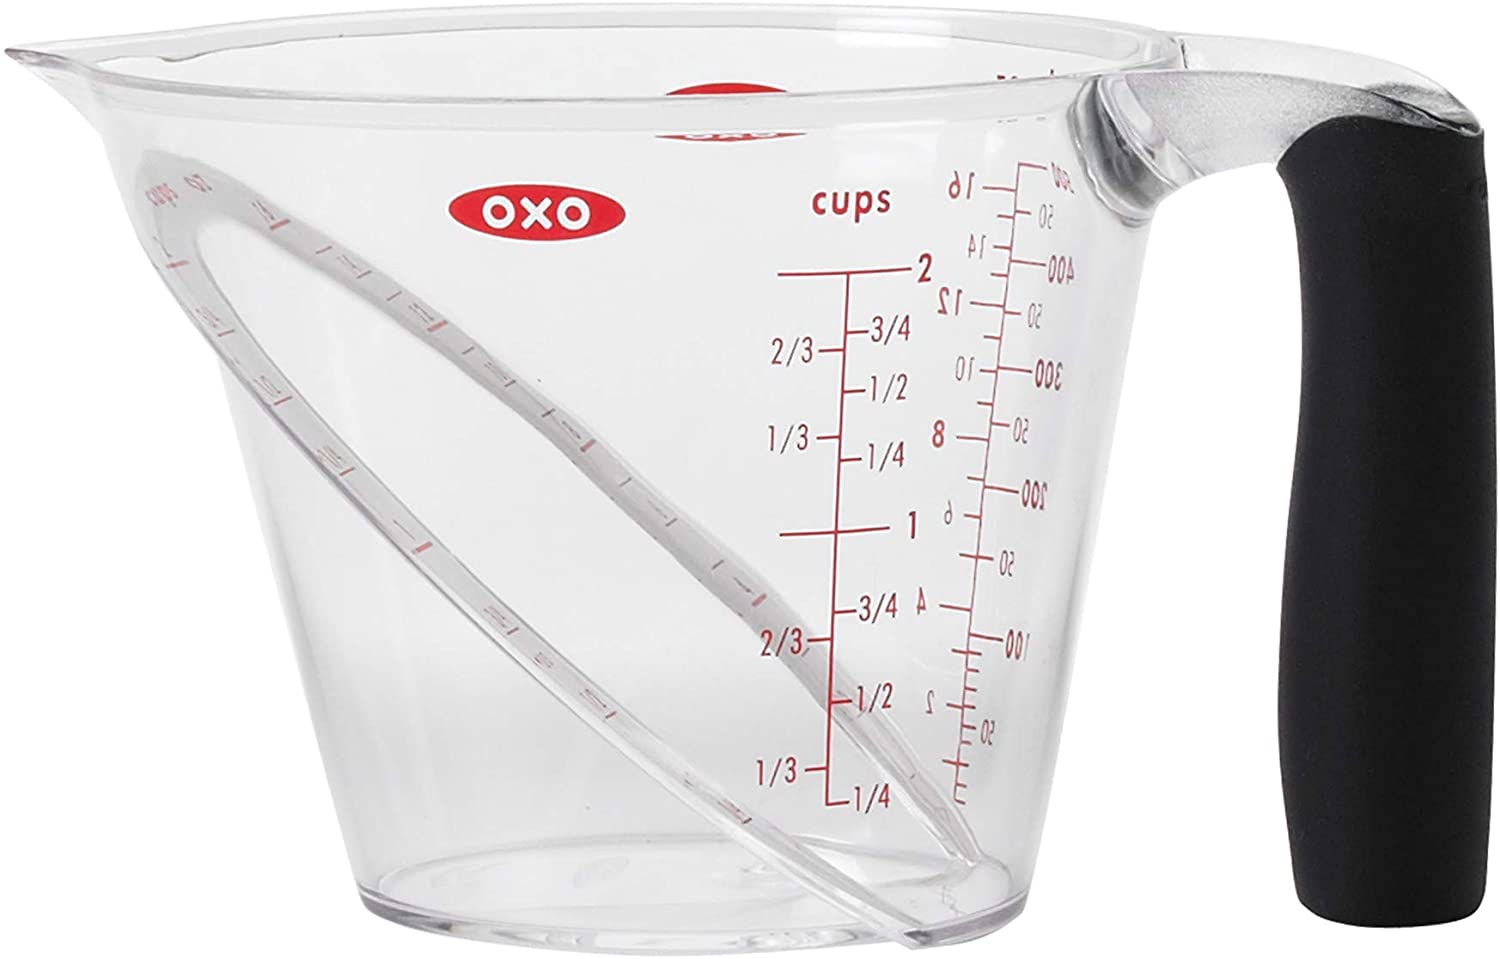 https://www.dontwasteyourmoney.com/wp-content/uploads/2020/08/oxo-good-grips-2-cup-angled-liquid-measuring-cup-liquid-measuring-cup.jpg